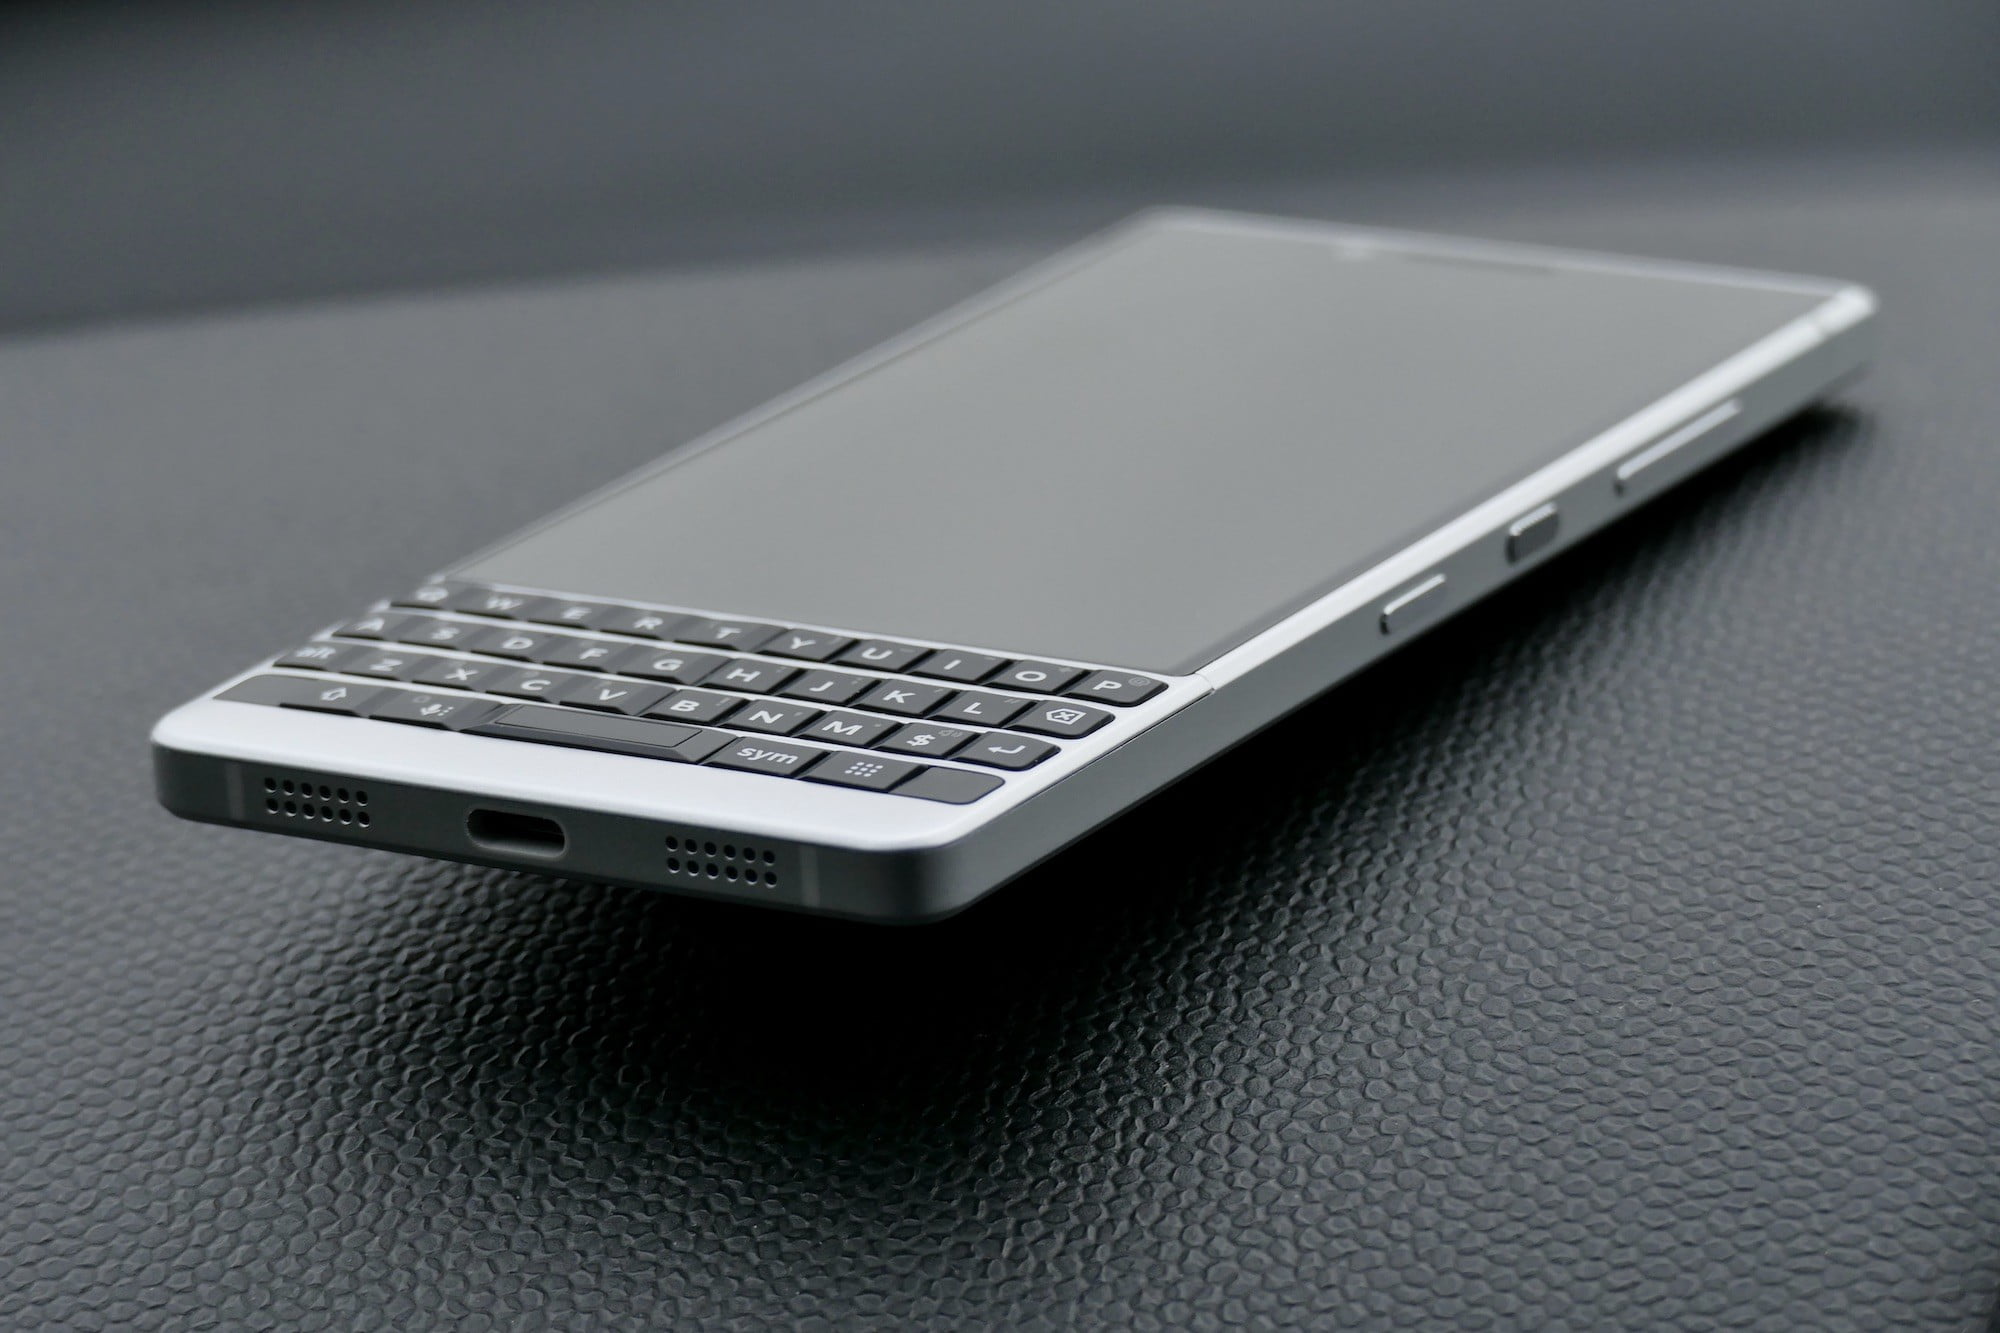 The BlackBerry Key2 shows why software updates